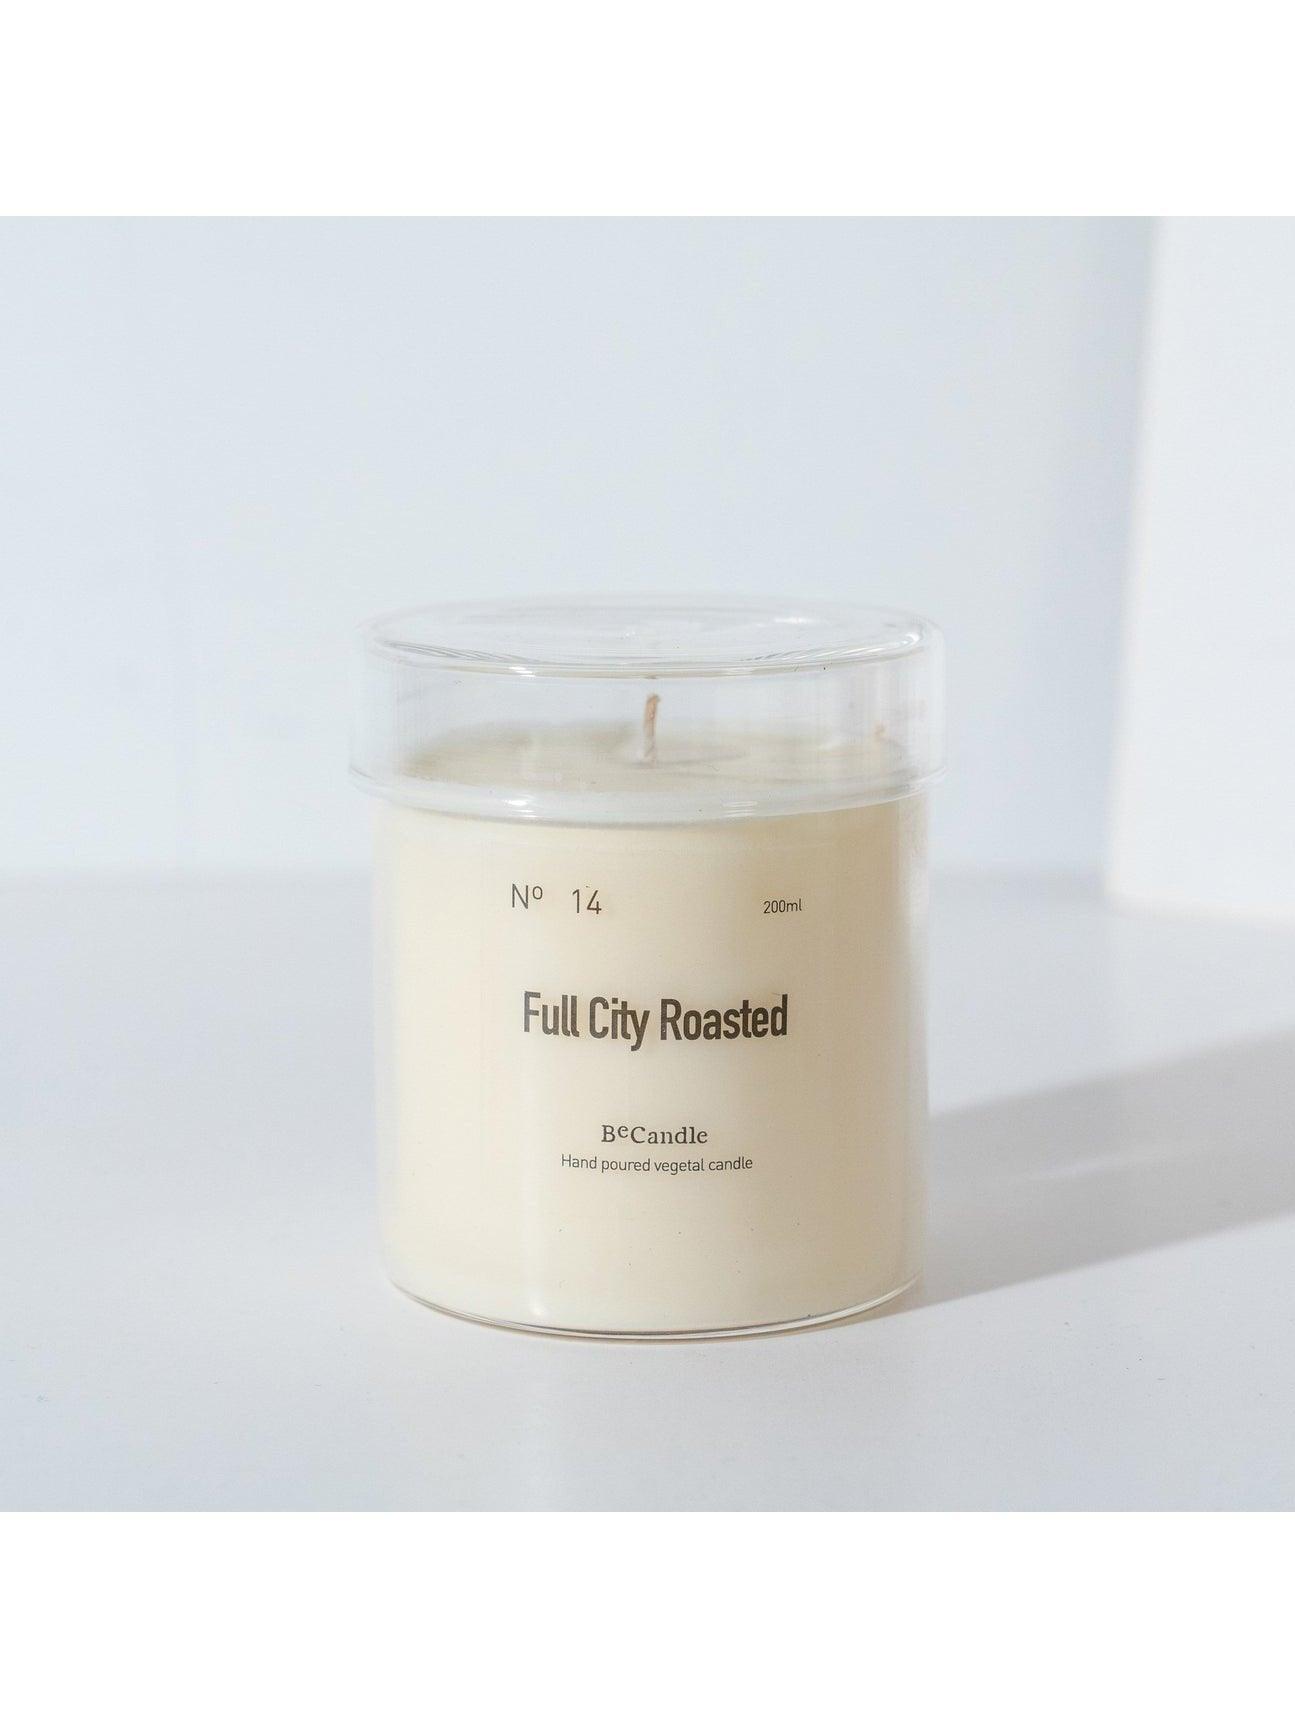 BeCandle Full City Roast Scented Candle 200g - no.14